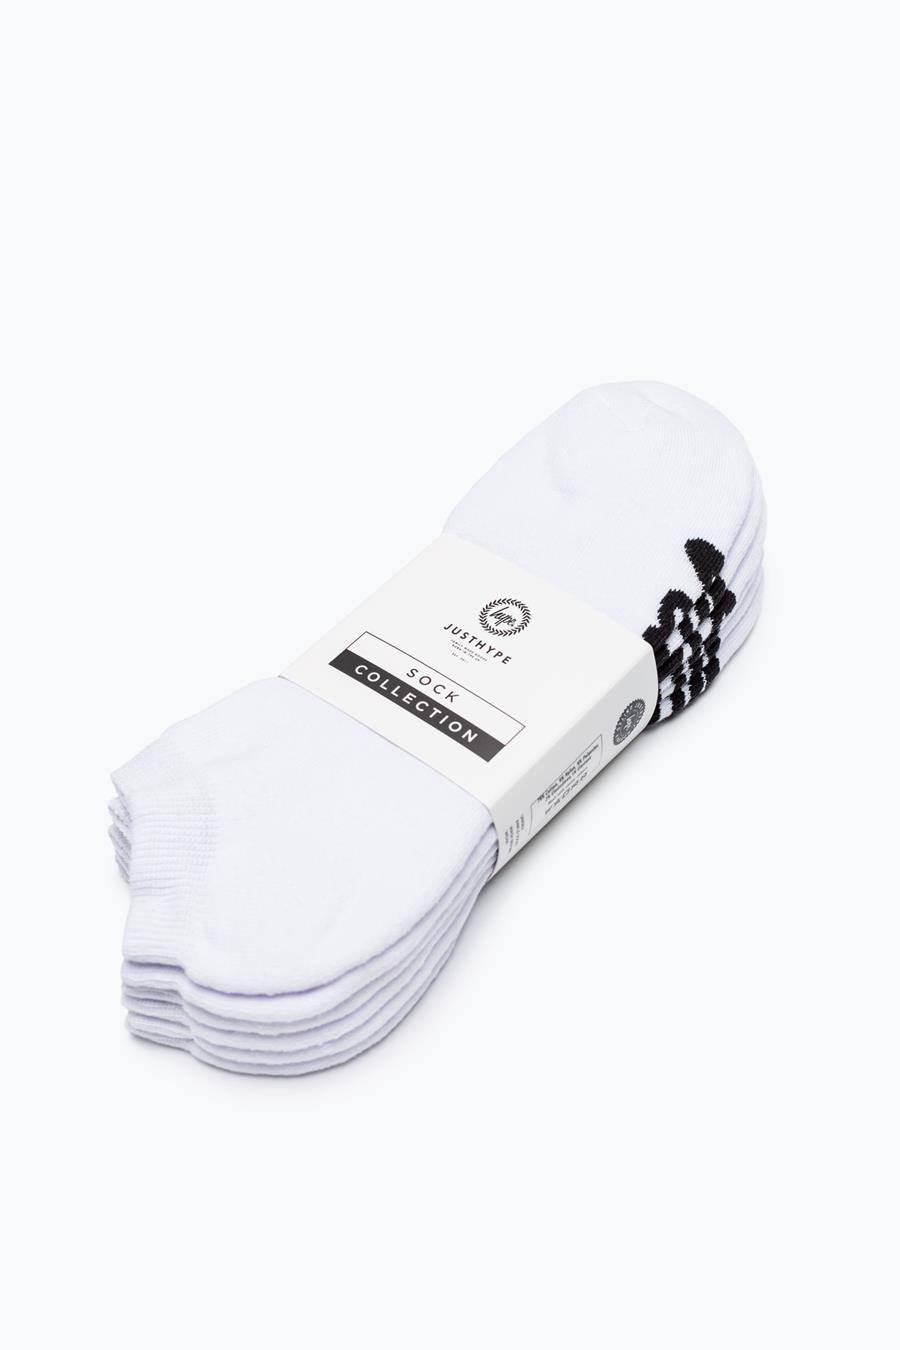 Hype White Script Trainer Socks 3 Pack | Size Large/X-Large